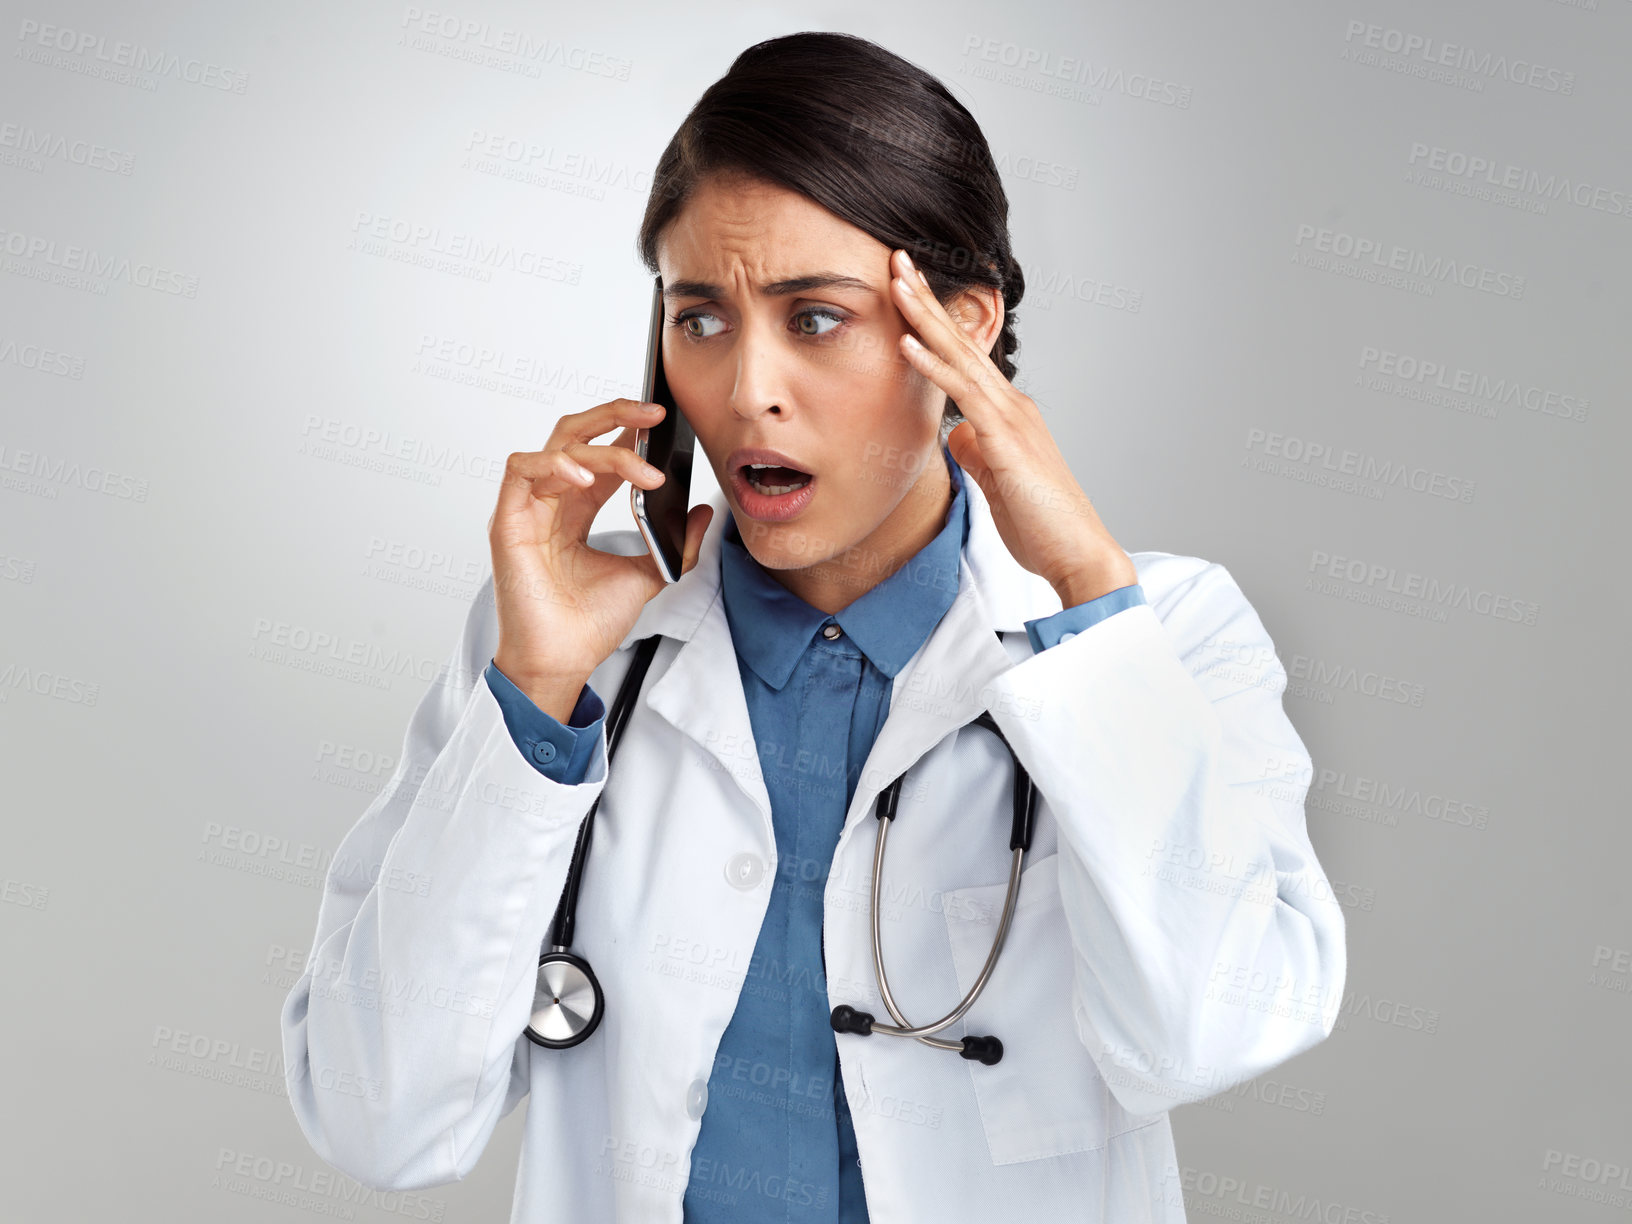 Buy stock photo Studio shot of a young doctor looking stressed while using a smartphone against a grey background